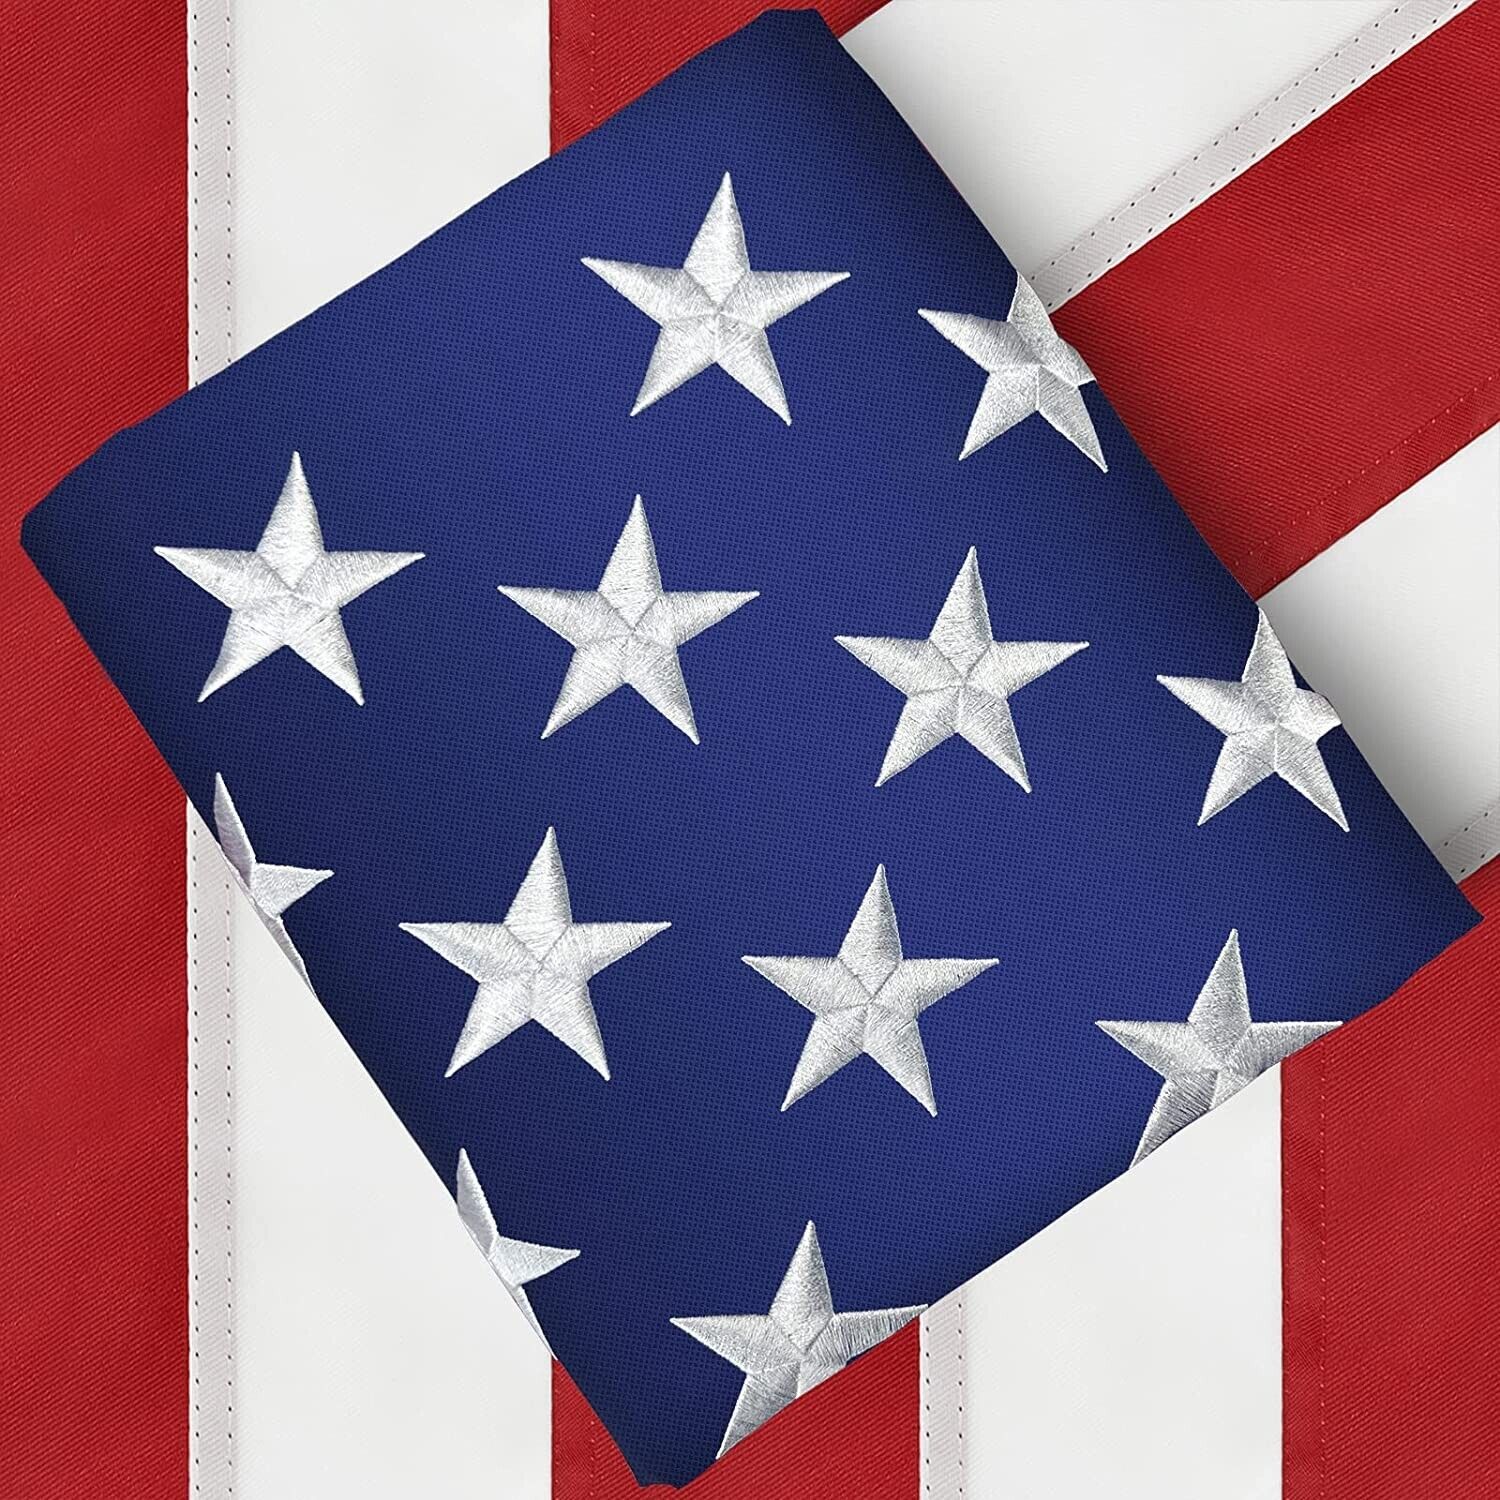 American Flag 3x5 FT for Outdoor, Heavy Duty Polyester US Flag Embroidered Stars